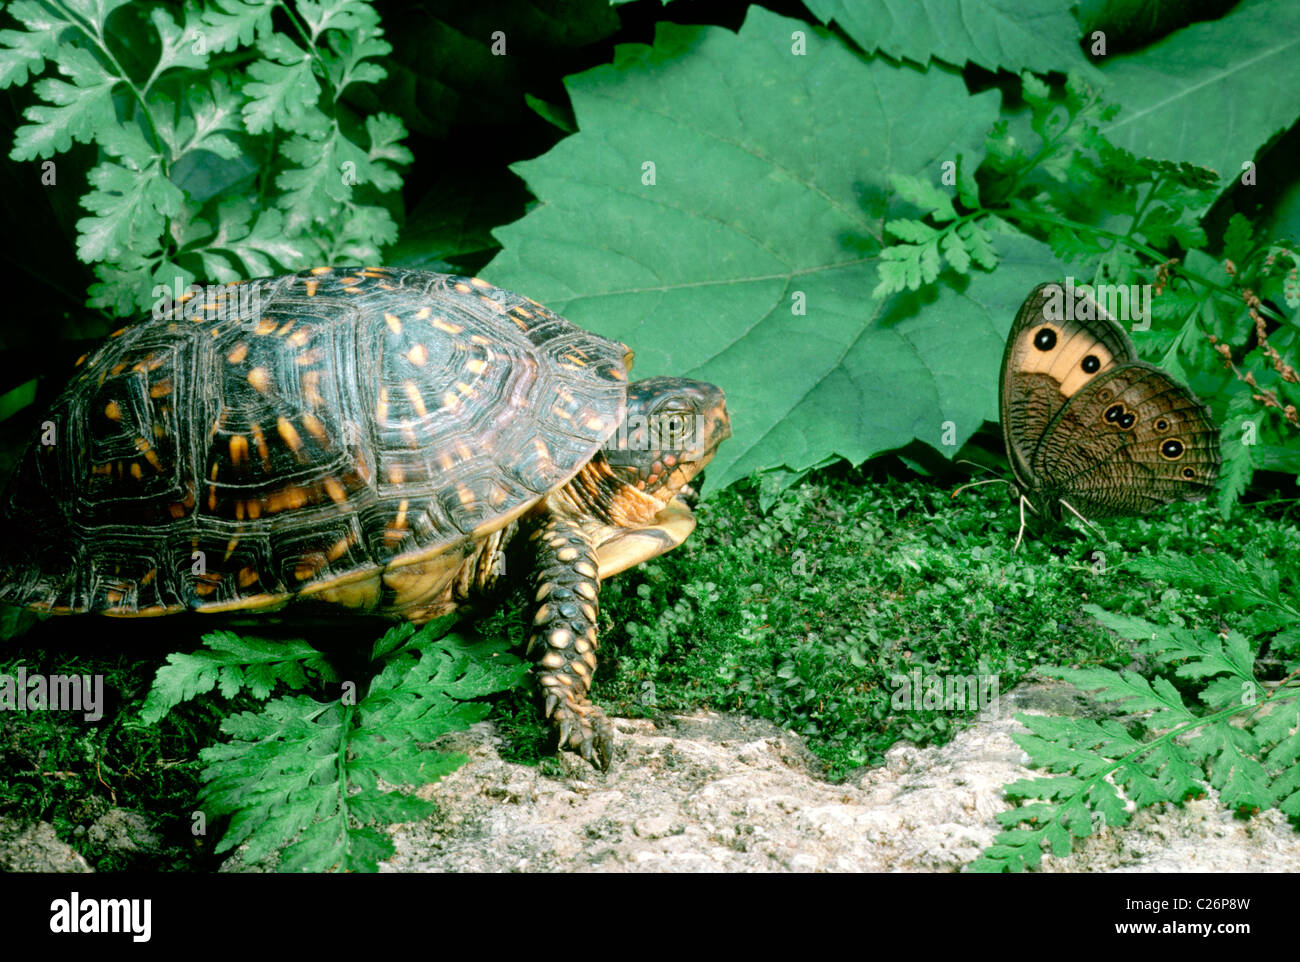 Female Ornate Box Turtle comes face to face with a beautiful Common Wood Nymph (Cercyonis pegala) Stock Photo